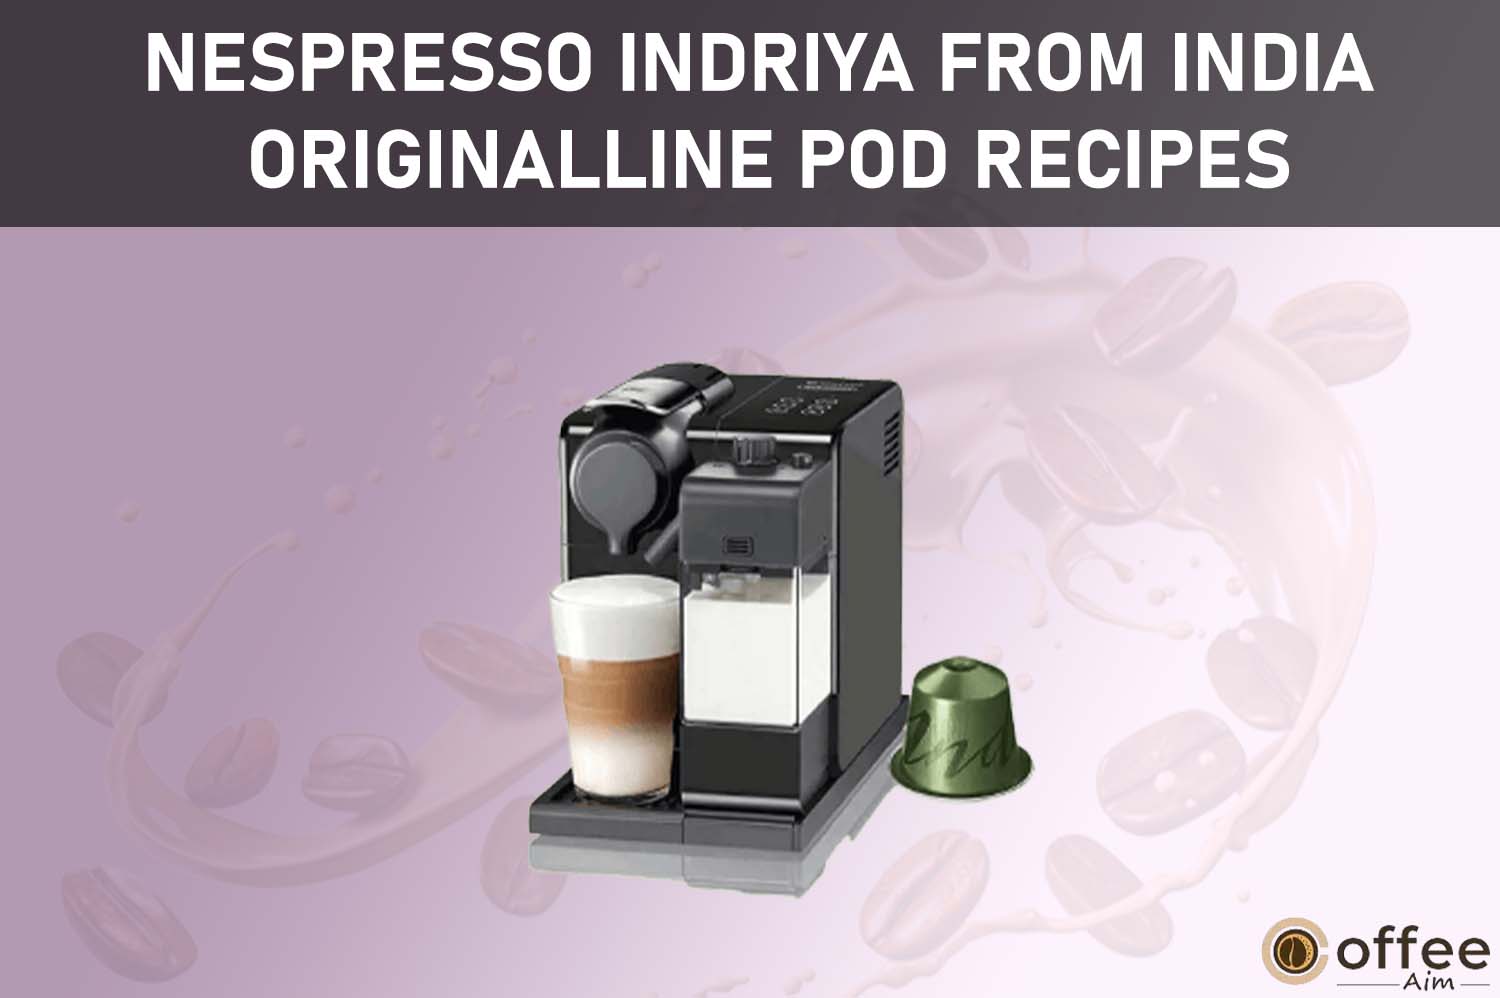 Featured image for the article "Nespresso Indriya from India OriginalLine Pod Recipes"